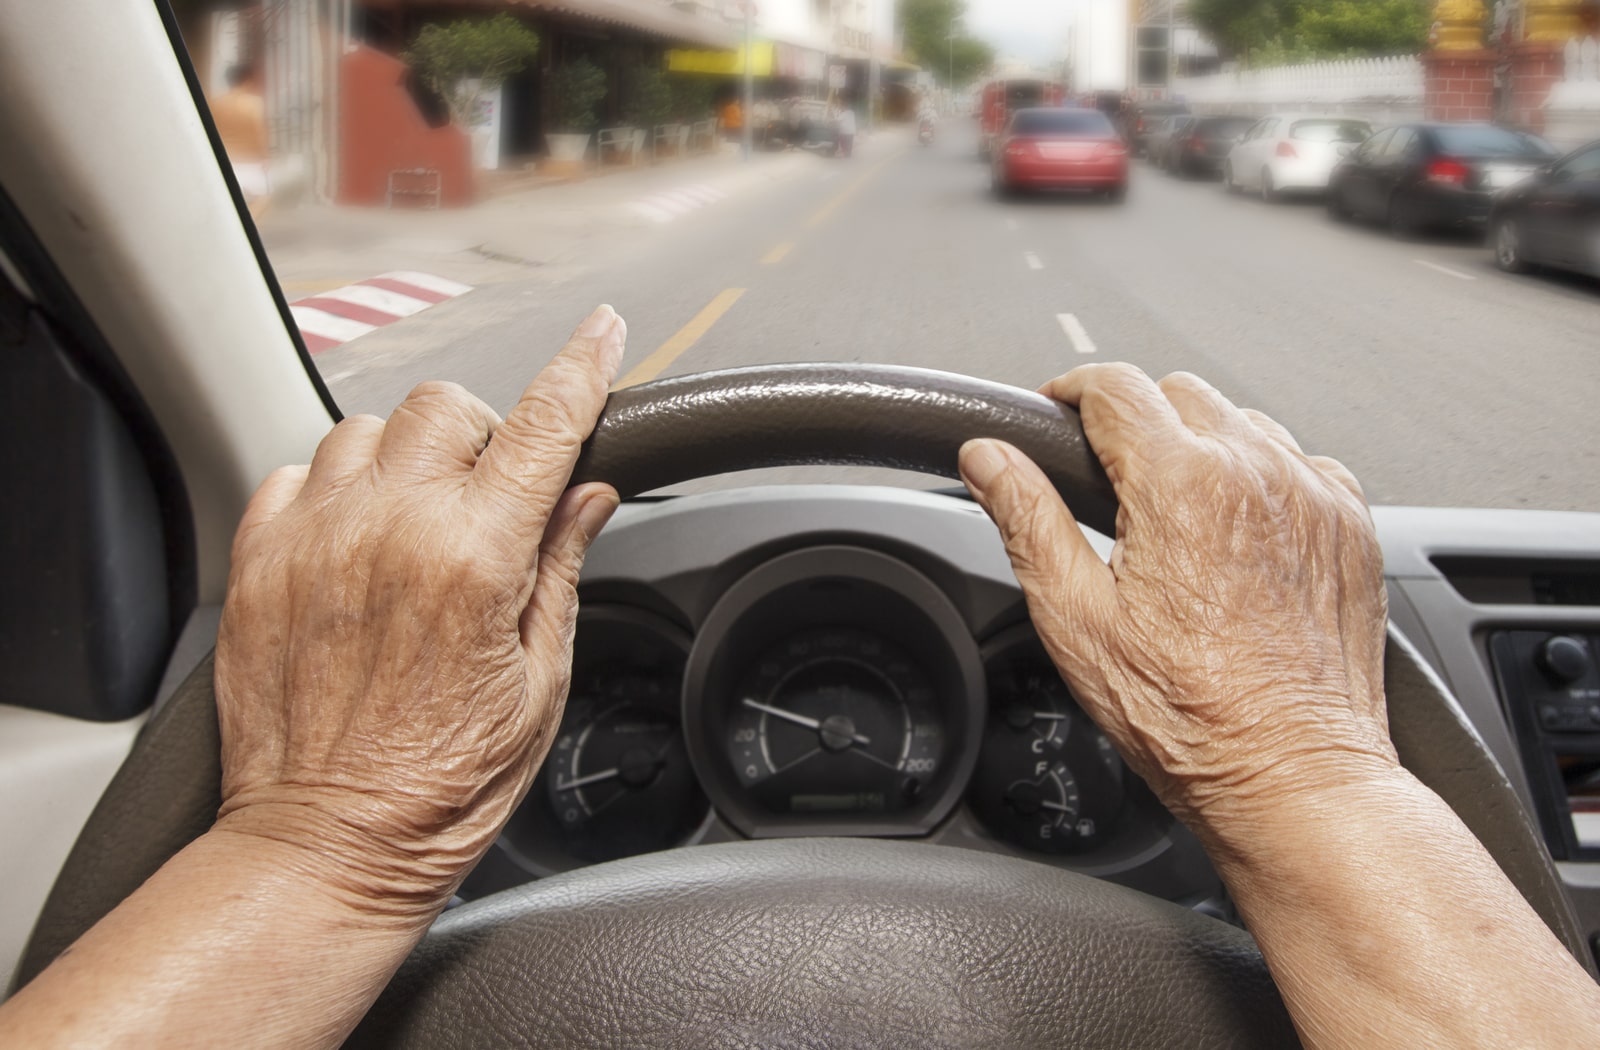 A first-person view of an older person driving a car